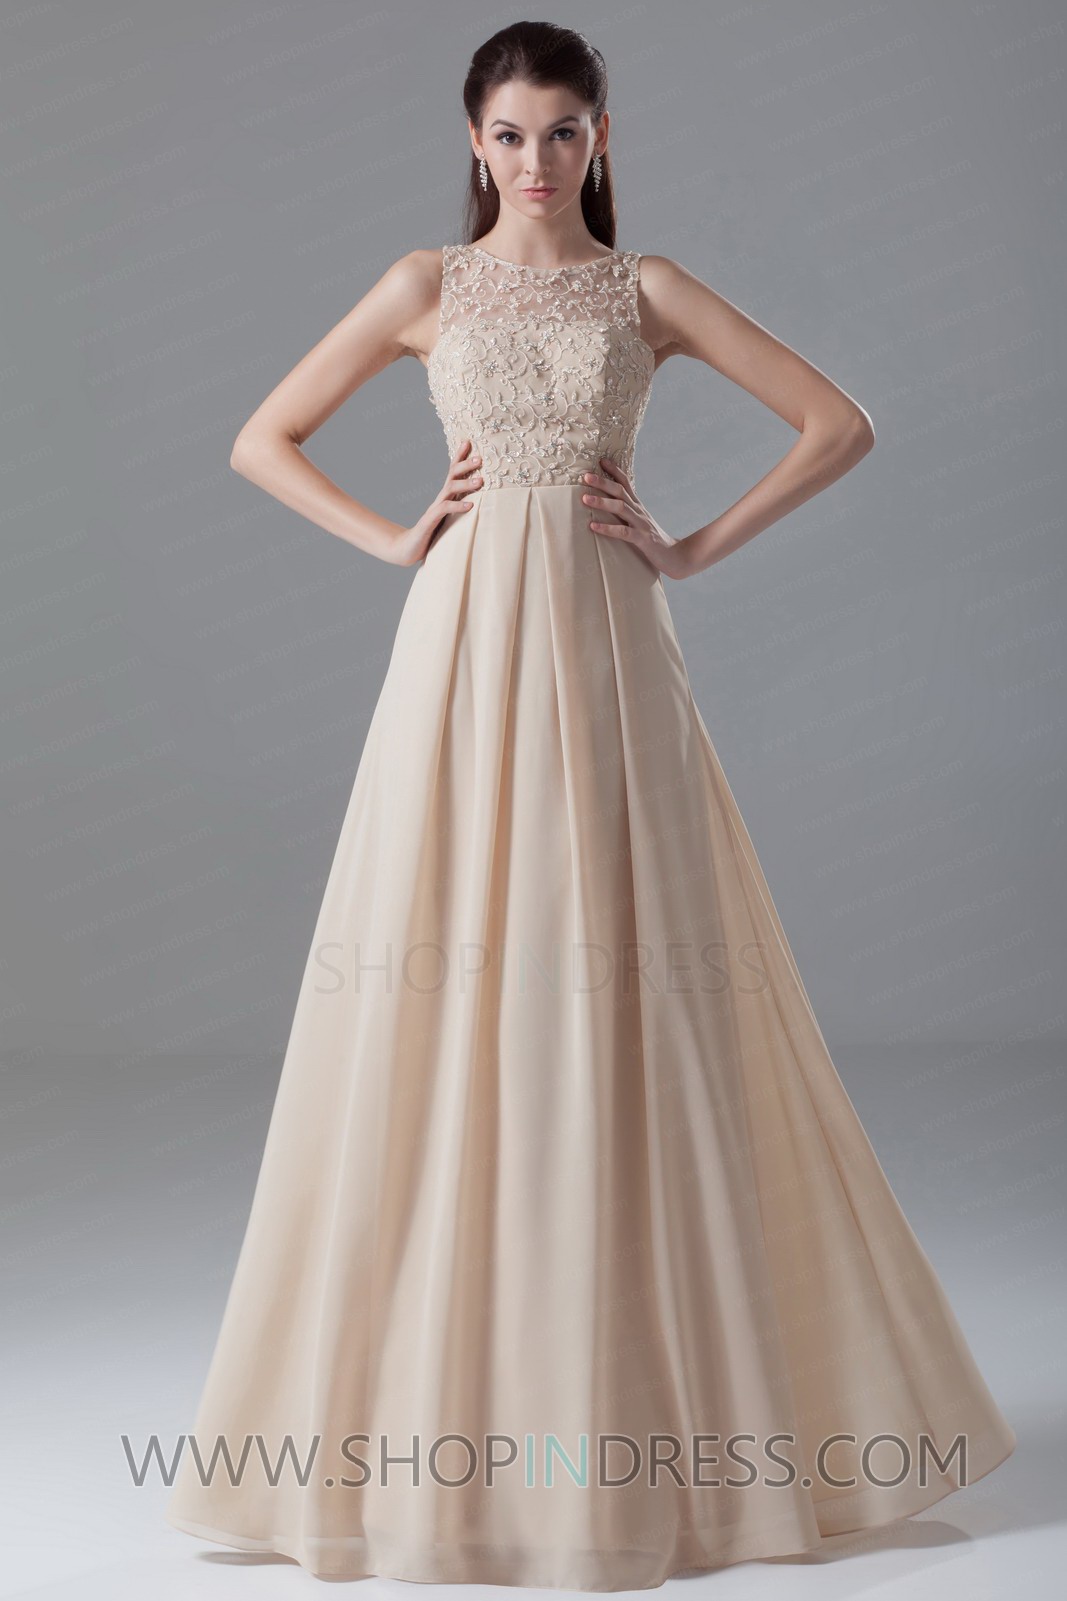 Champagne Cocktail Dress For Wedding - New Trend 2017-2018